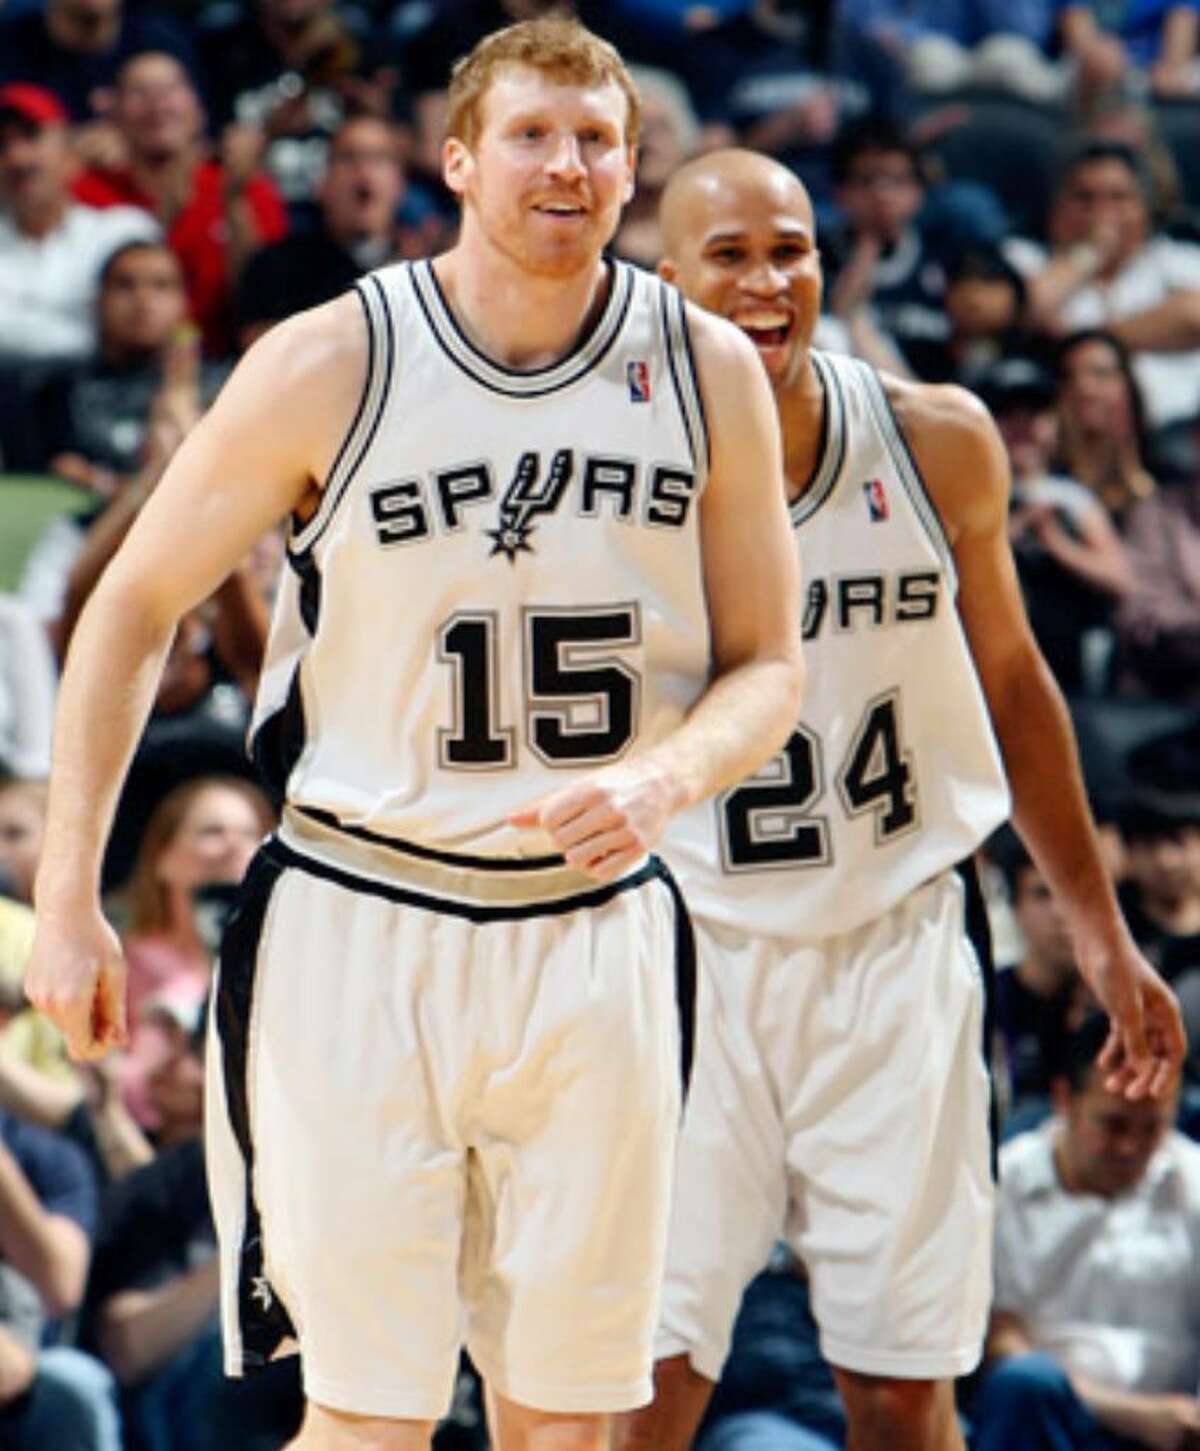 Matt Bonner (left) and teammate Richard Jefferson were all smiles after Bonner scored on a shot from behind the backboard against the Clippers in March at the AT&T Center.